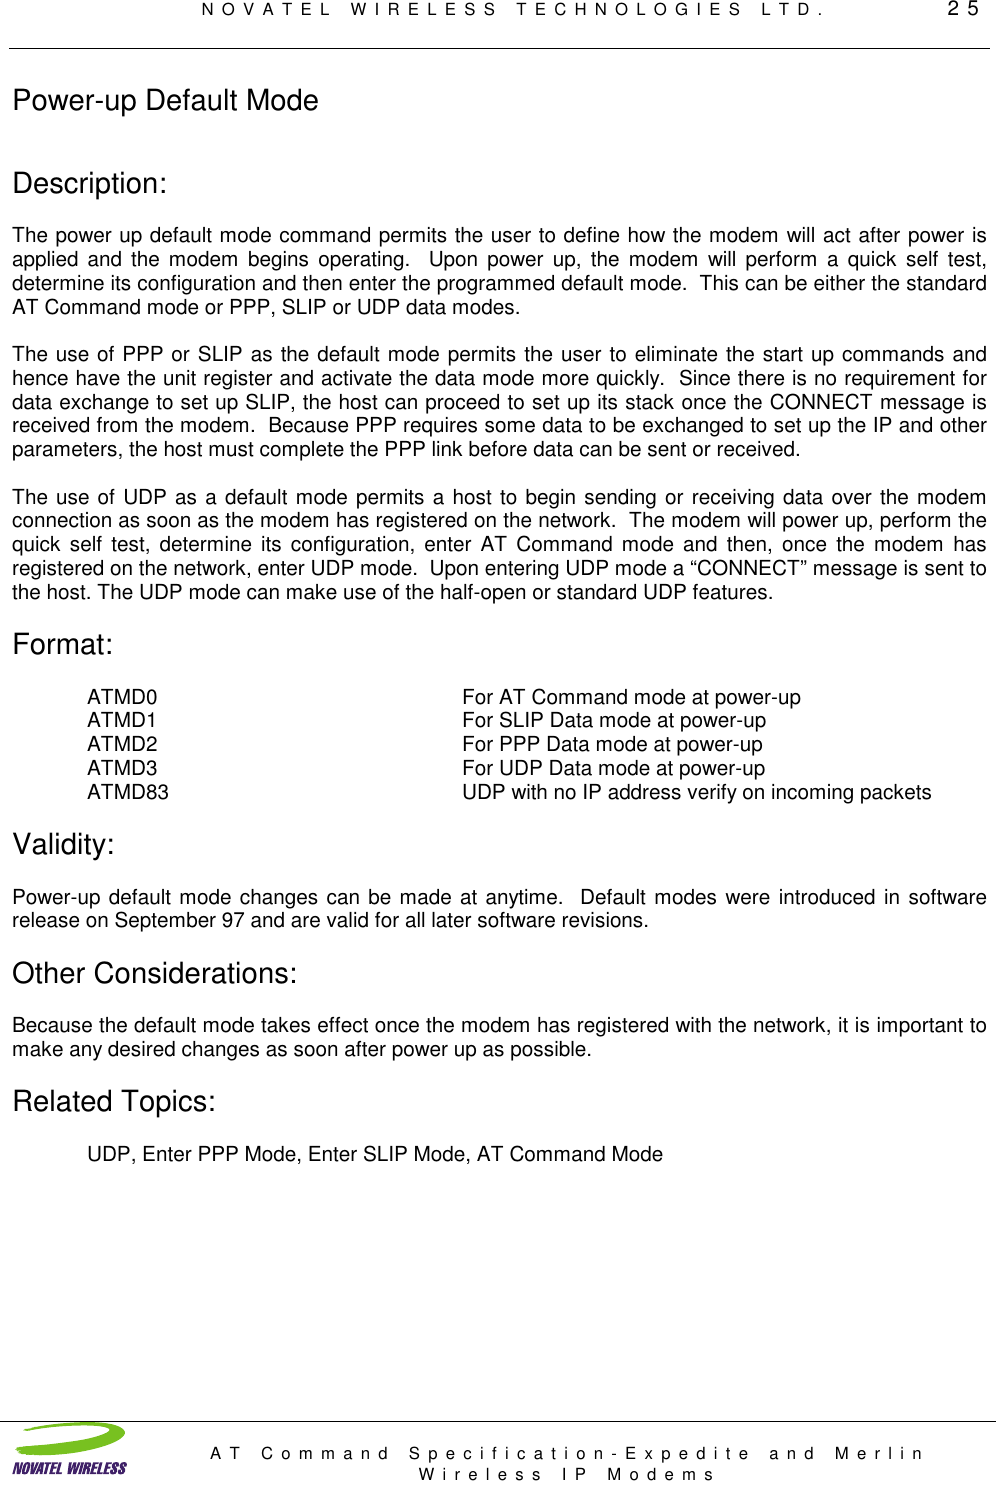 NOVATEL WIRELESS TECHNOLOGIES LTD.         25AT Command Specification-Expedite and MerlinWireless IP ModemsPower-up Default ModeDescription:The power up default mode command permits the user to define how the modem will act after power isapplied and the modem begins operating.  Upon power up, the modem will perform a quick self test,determine its configuration and then enter the programmed default mode.  This can be either the standardAT Command mode or PPP, SLIP or UDP data modes.The use of PPP or SLIP as the default mode permits the user to eliminate the start up commands andhence have the unit register and activate the data mode more quickly.  Since there is no requirement fordata exchange to set up SLIP, the host can proceed to set up its stack once the CONNECT message isreceived from the modem.  Because PPP requires some data to be exchanged to set up the IP and otherparameters, the host must complete the PPP link before data can be sent or received.The use of UDP as a default mode permits a host to begin sending or receiving data over the modemconnection as soon as the modem has registered on the network.  The modem will power up, perform thequick self test, determine its configuration, enter AT Command mode and then, once the modem hasregistered on the network, enter UDP mode.  Upon entering UDP mode a “CONNECT” message is sent tothe host. The UDP mode can make use of the half-open or standard UDP features.Format:ATMD0 For AT Command mode at power-upATMD1 For SLIP Data mode at power-upATMD2 For PPP Data mode at power-upATMD3 For UDP Data mode at power-upATMD83 UDP with no IP address verify on incoming packetsValidity:Power-up default mode changes can be made at anytime.  Default modes were introduced in softwarerelease on September 97 and are valid for all later software revisions.Other Considerations:Because the default mode takes effect once the modem has registered with the network, it is important tomake any desired changes as soon after power up as possible.Related Topics:UDP, Enter PPP Mode, Enter SLIP Mode, AT Command Mode